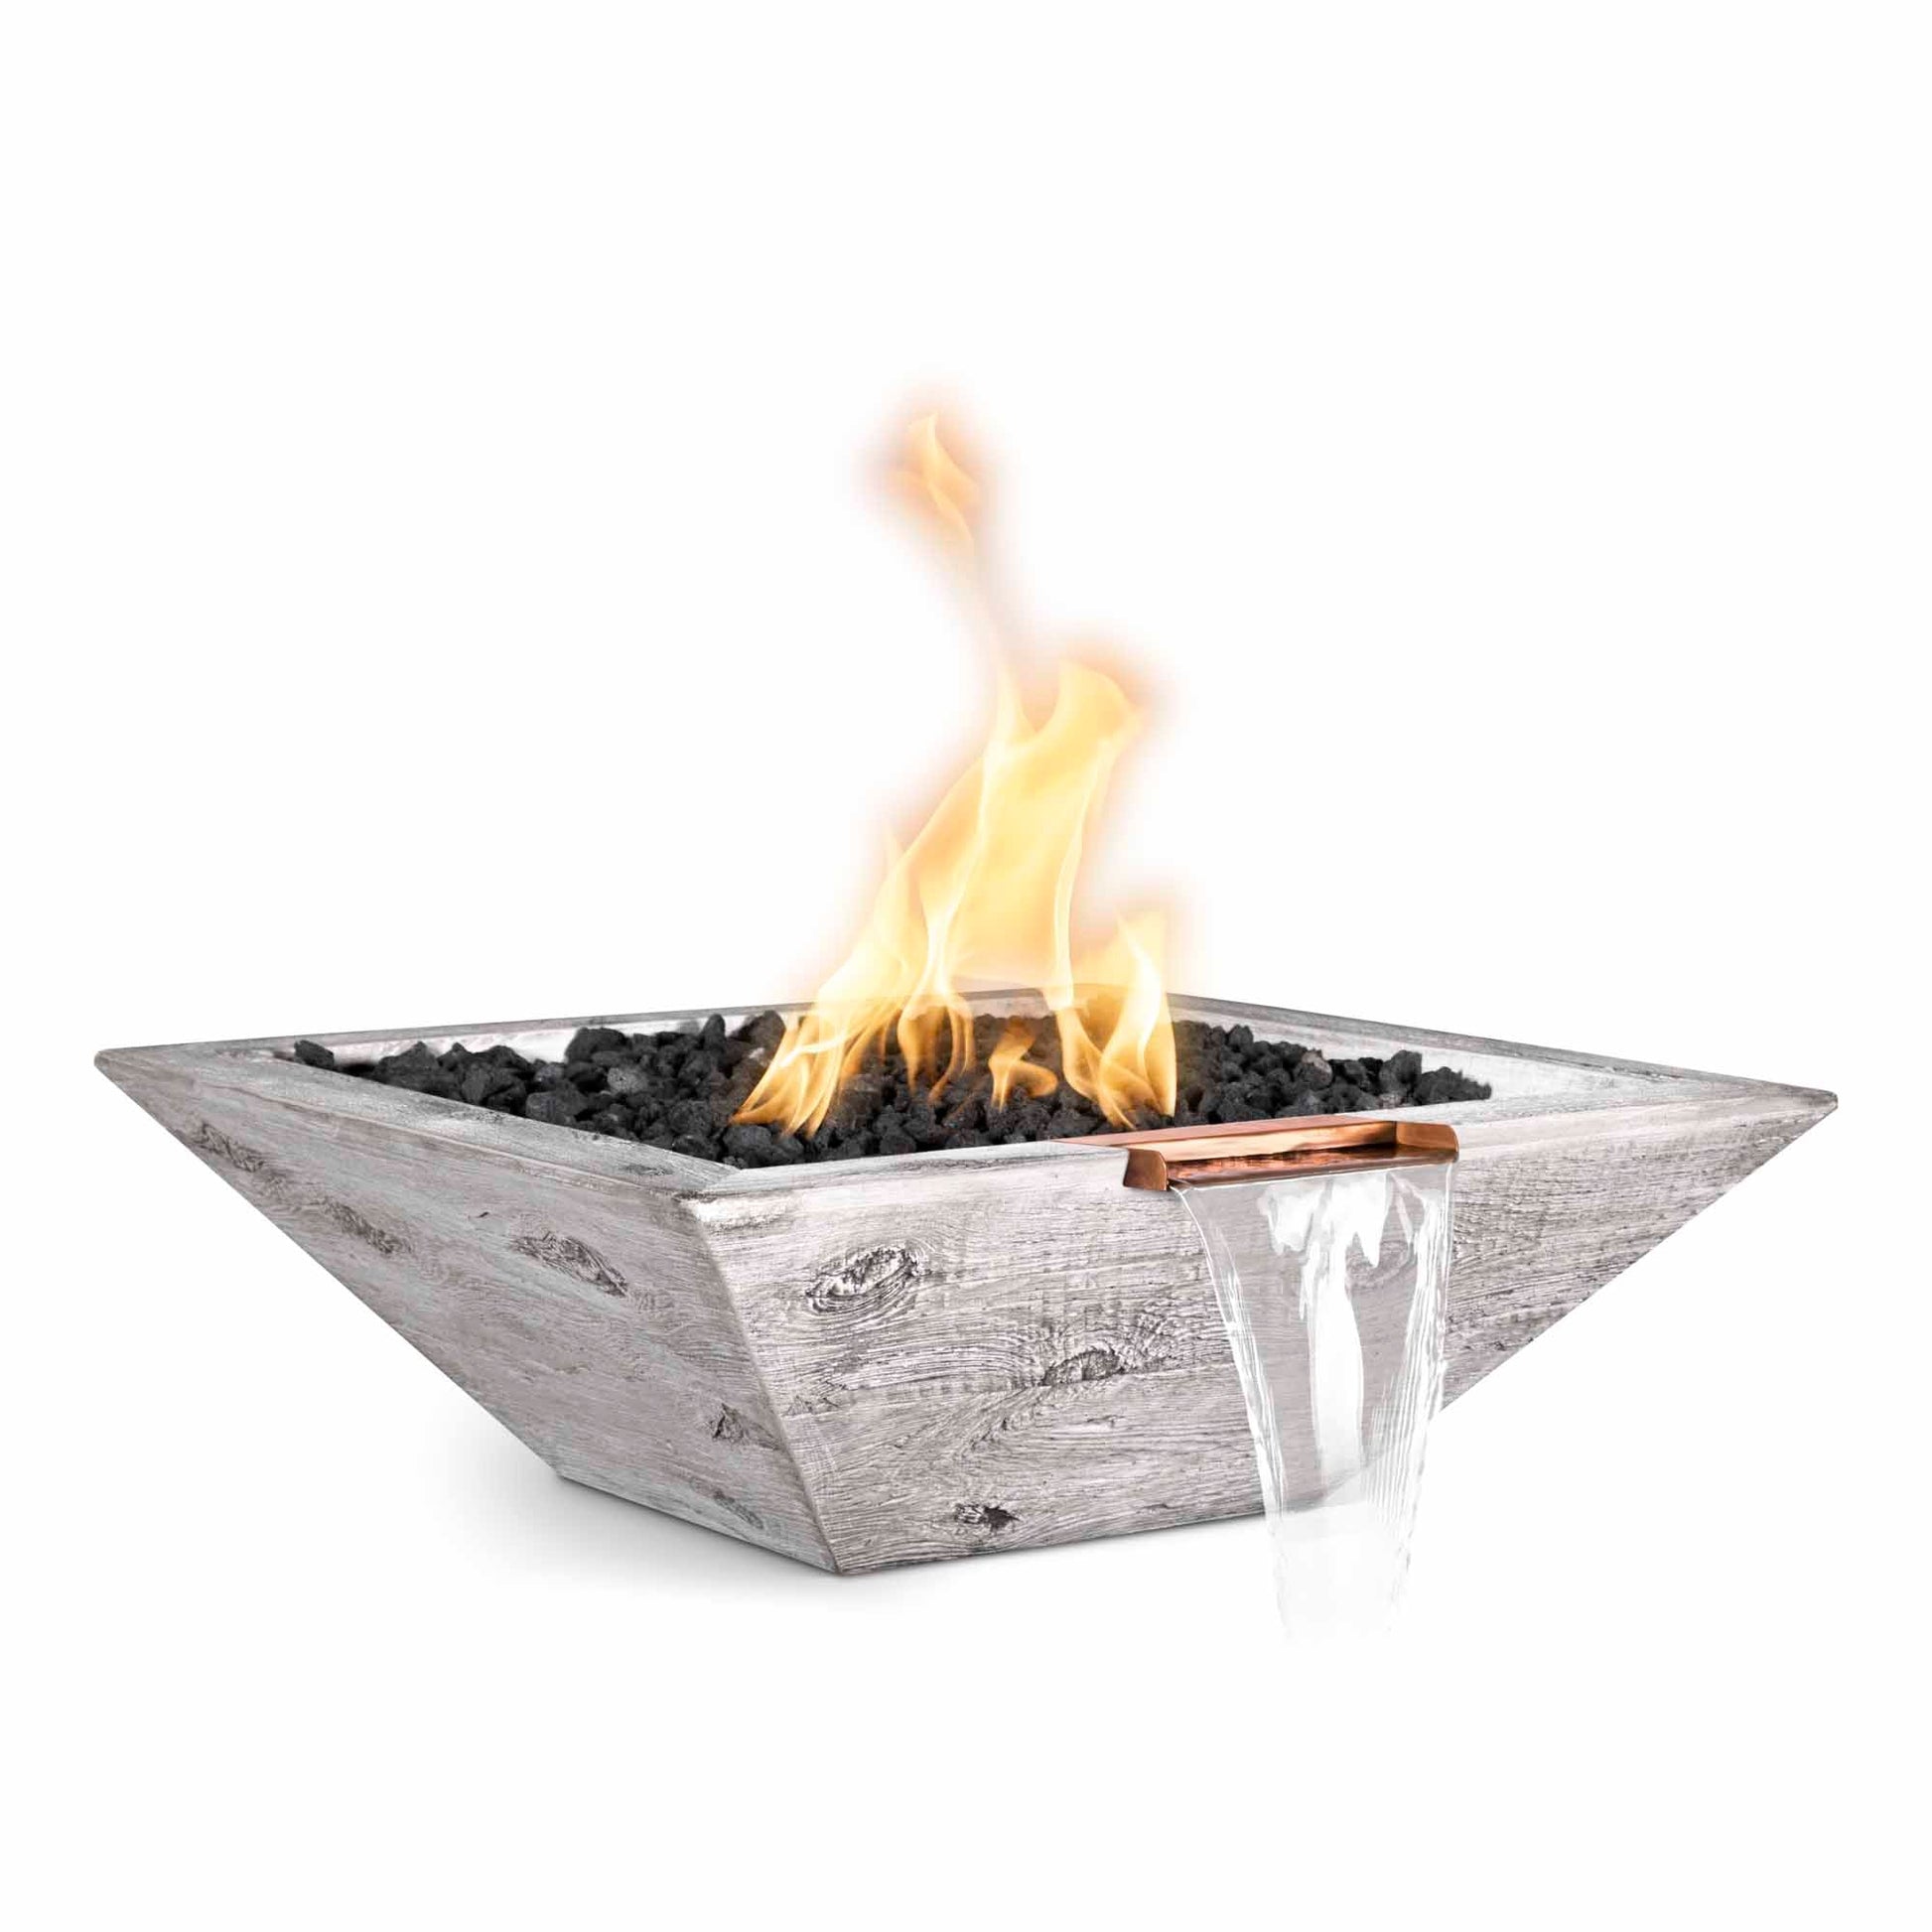 The Outdoor Plus Square Maya 24" Oak Wood Grain Natural Gas Fire & Water Bowl with Match Lit with Flame Sense Ignition